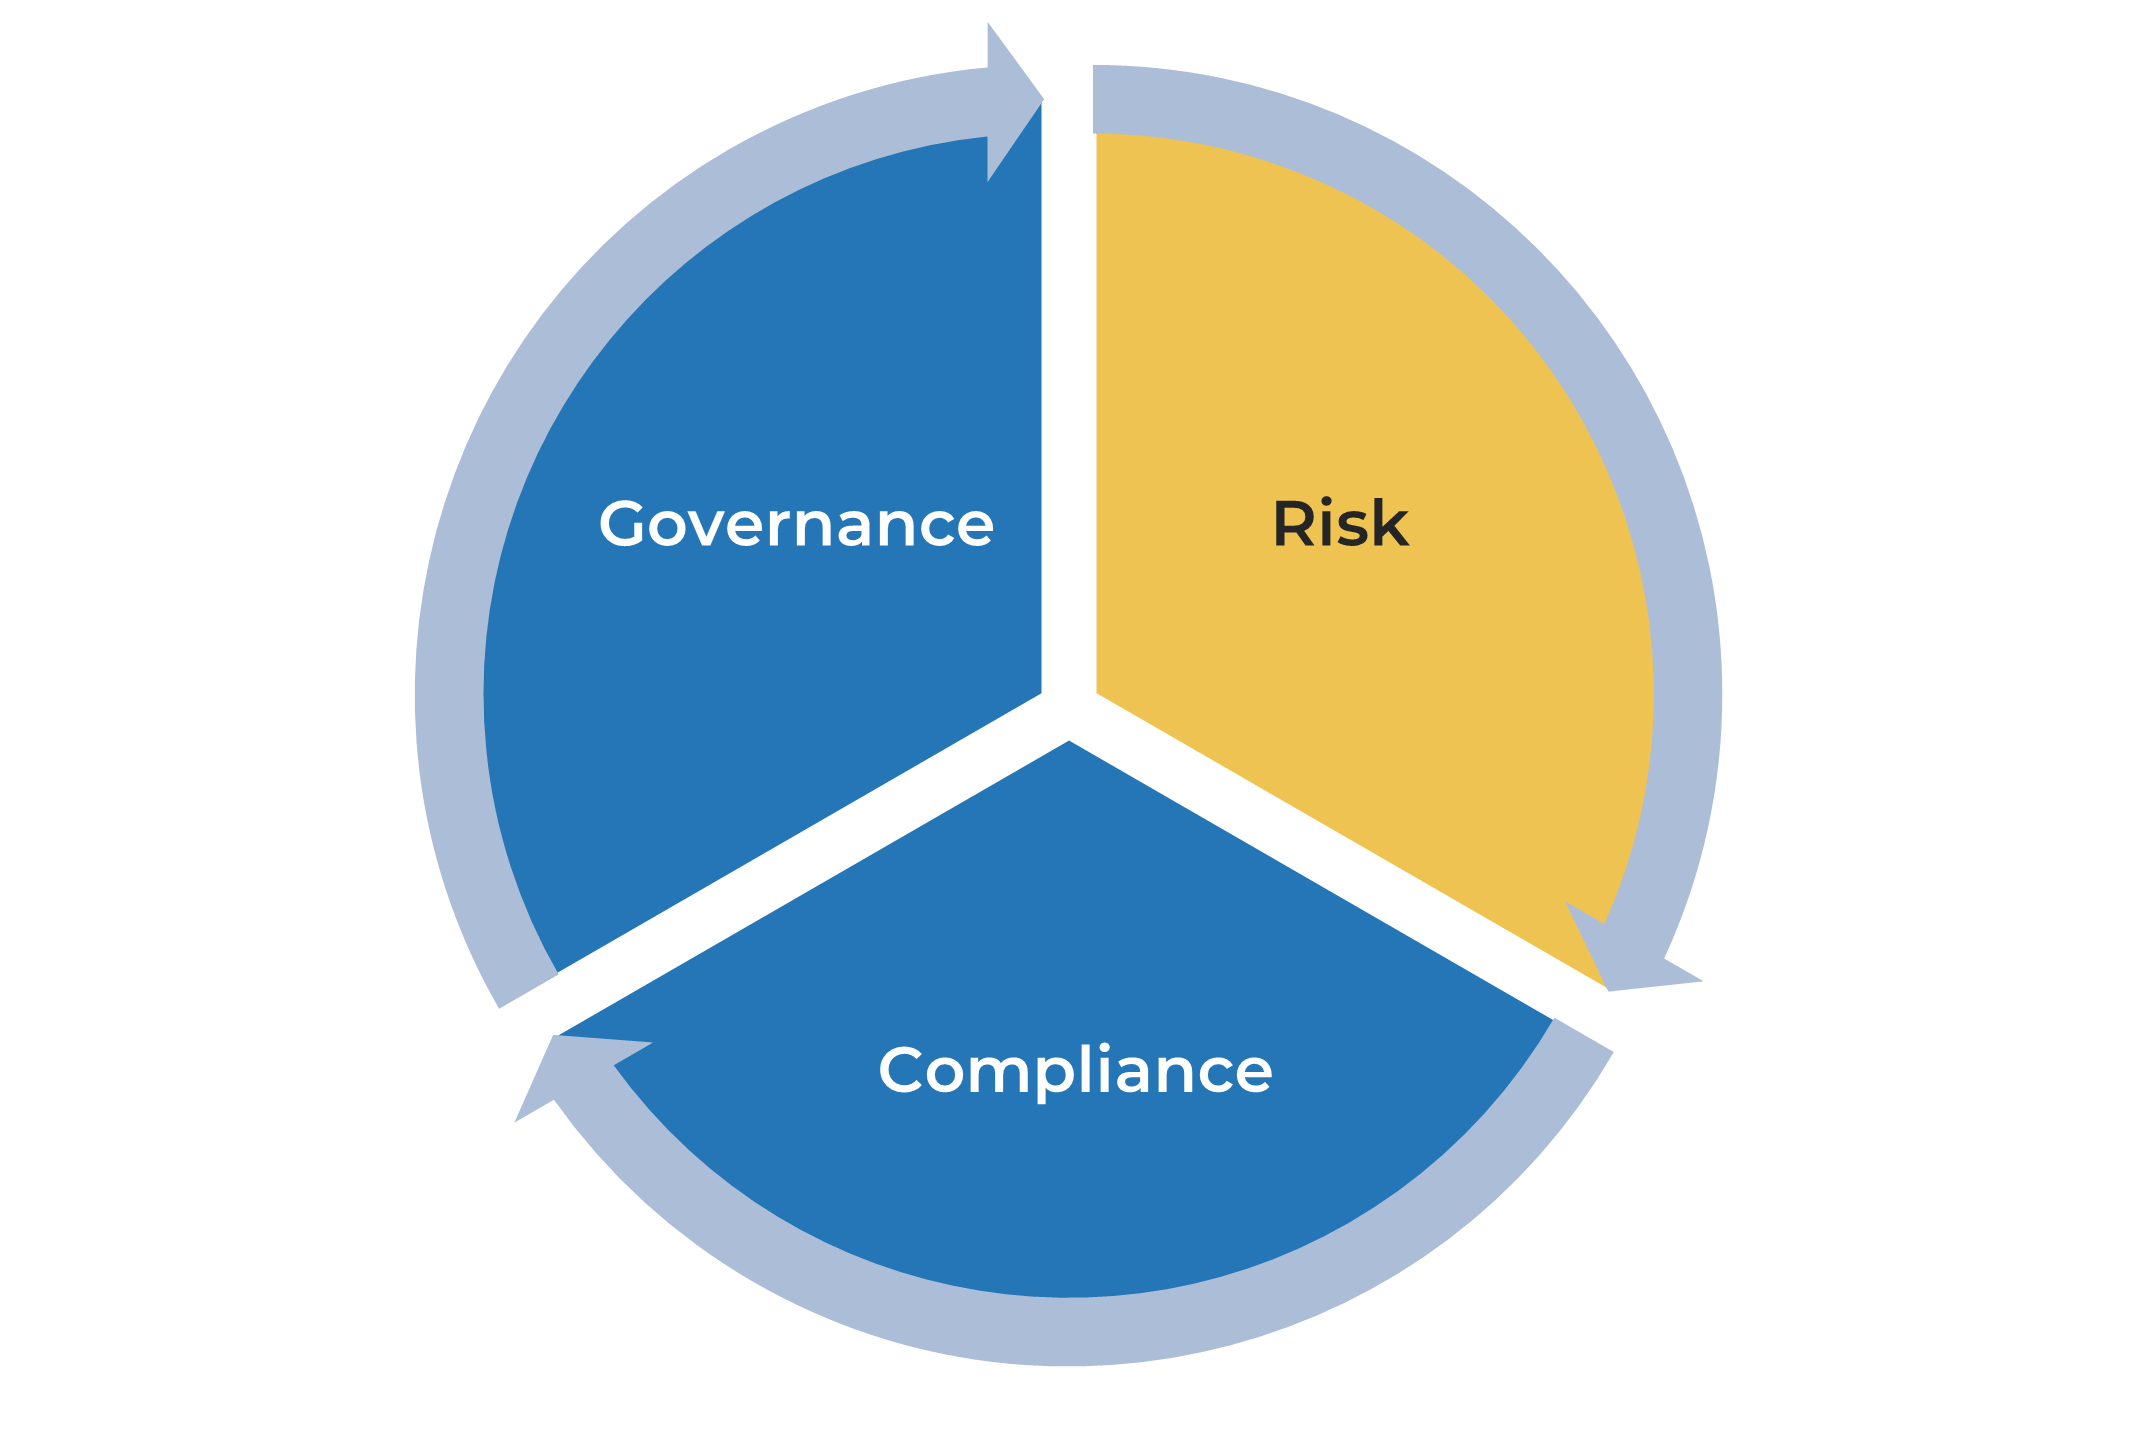 The image contains a screenshot of a continuous circle that is divided into three parts: risk, compliance, and governance.